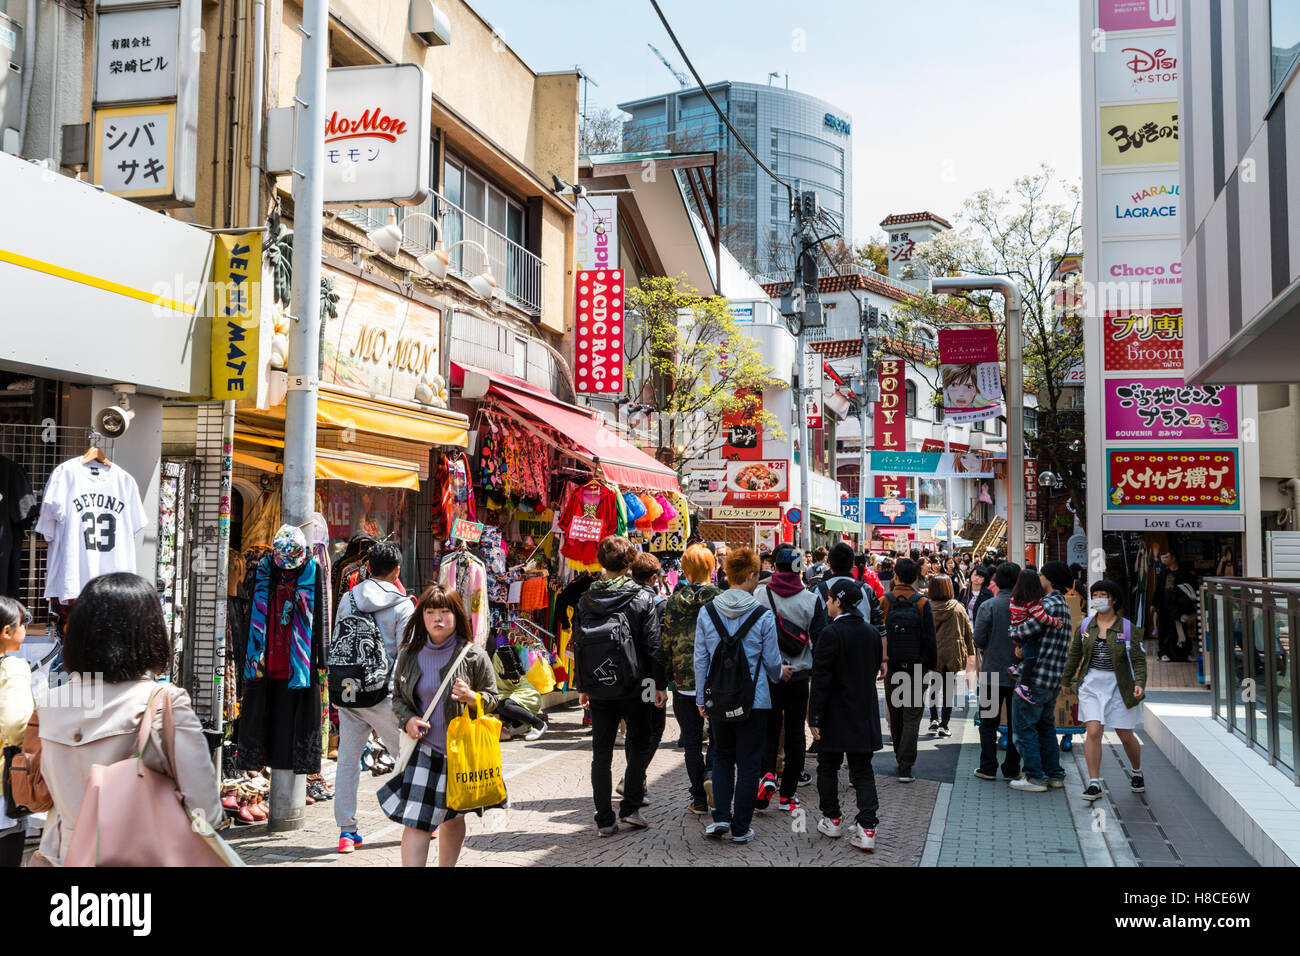 Japan, Tokyo, Harajuku, Takeshita-dori. View along street with ACDC Rag and other stores, busy with people, tourists and shoppers. Daytime. Stock Photo